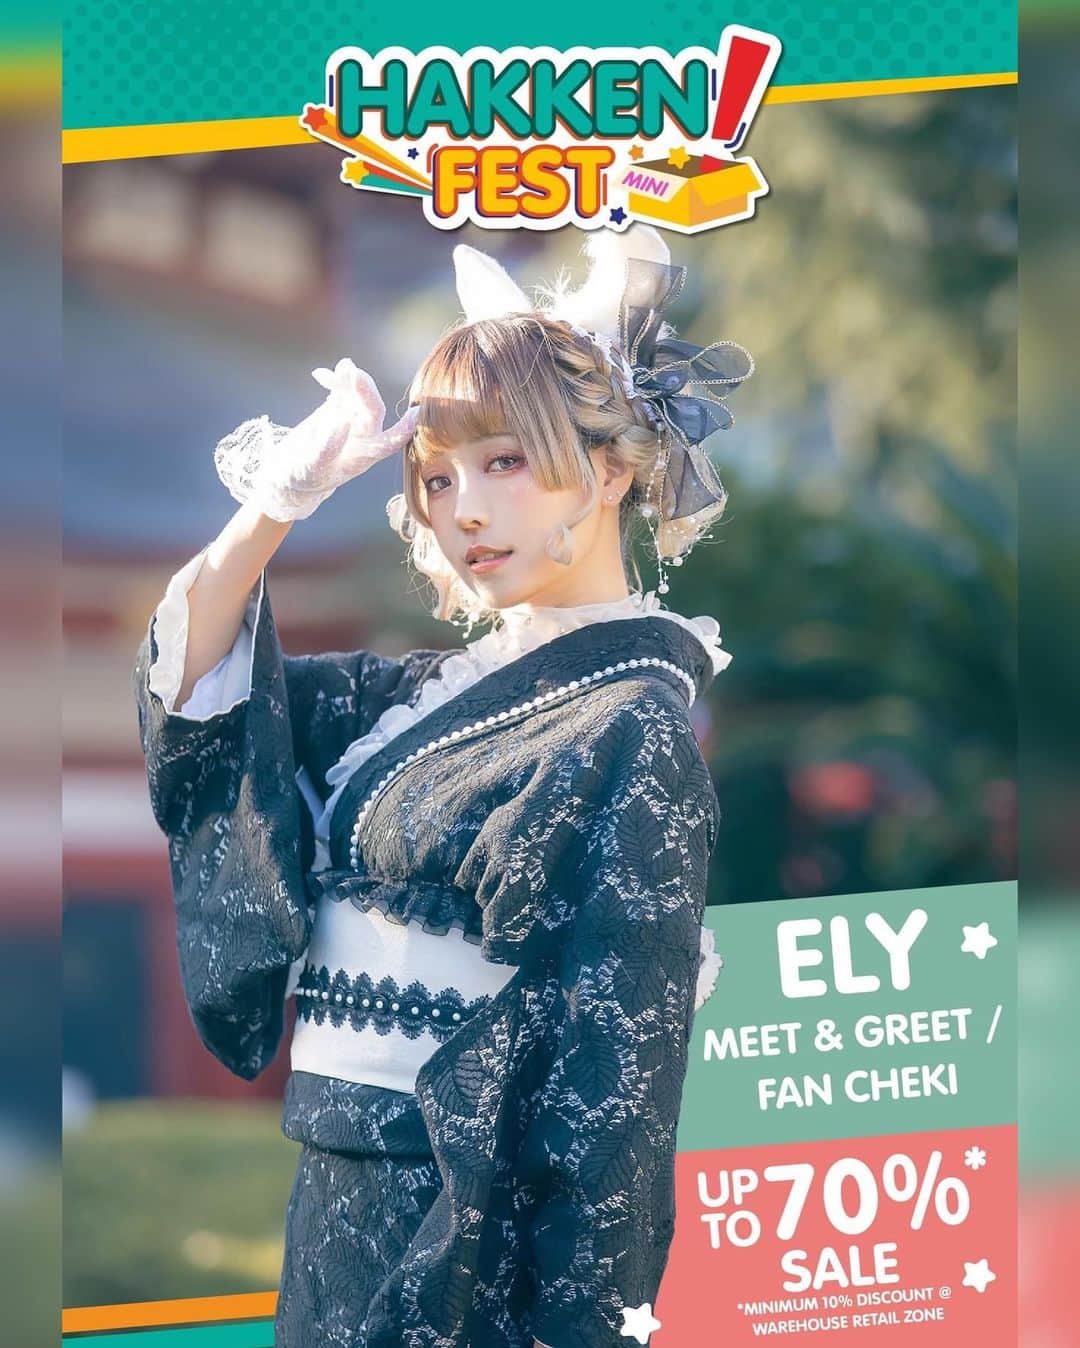 Elyのインスタグラム：「Hi everyone✨I'm excited to announce that I'll be holding my first overseas exhibition in Singapore! Also, you'll have the opportunity to meet and take photos with me💕 Come join me and experience the ultimate cosplay photo gallery event!  🎉Hakken! Fest Mini 2023 🌐 @hakkenonline  🗓️ 11 & 12 March 📌Location: Hakken! Ubi Warehouse 21 Ubi Road 1 #04-02 Singapore 408724 ⏰ 10am - 7pm  很開心自己的第一次的海外展覽可以在新加坡舉辦✨ 現場將展覽出許多E的原創作品,也有合照簽名的活動，Hakken團隊和E子都希望能給大家不同以往的活動體驗😳 期待這個週末和大家見面💕  #ely #elycosplay #excibition #singapore #hakkenfest」